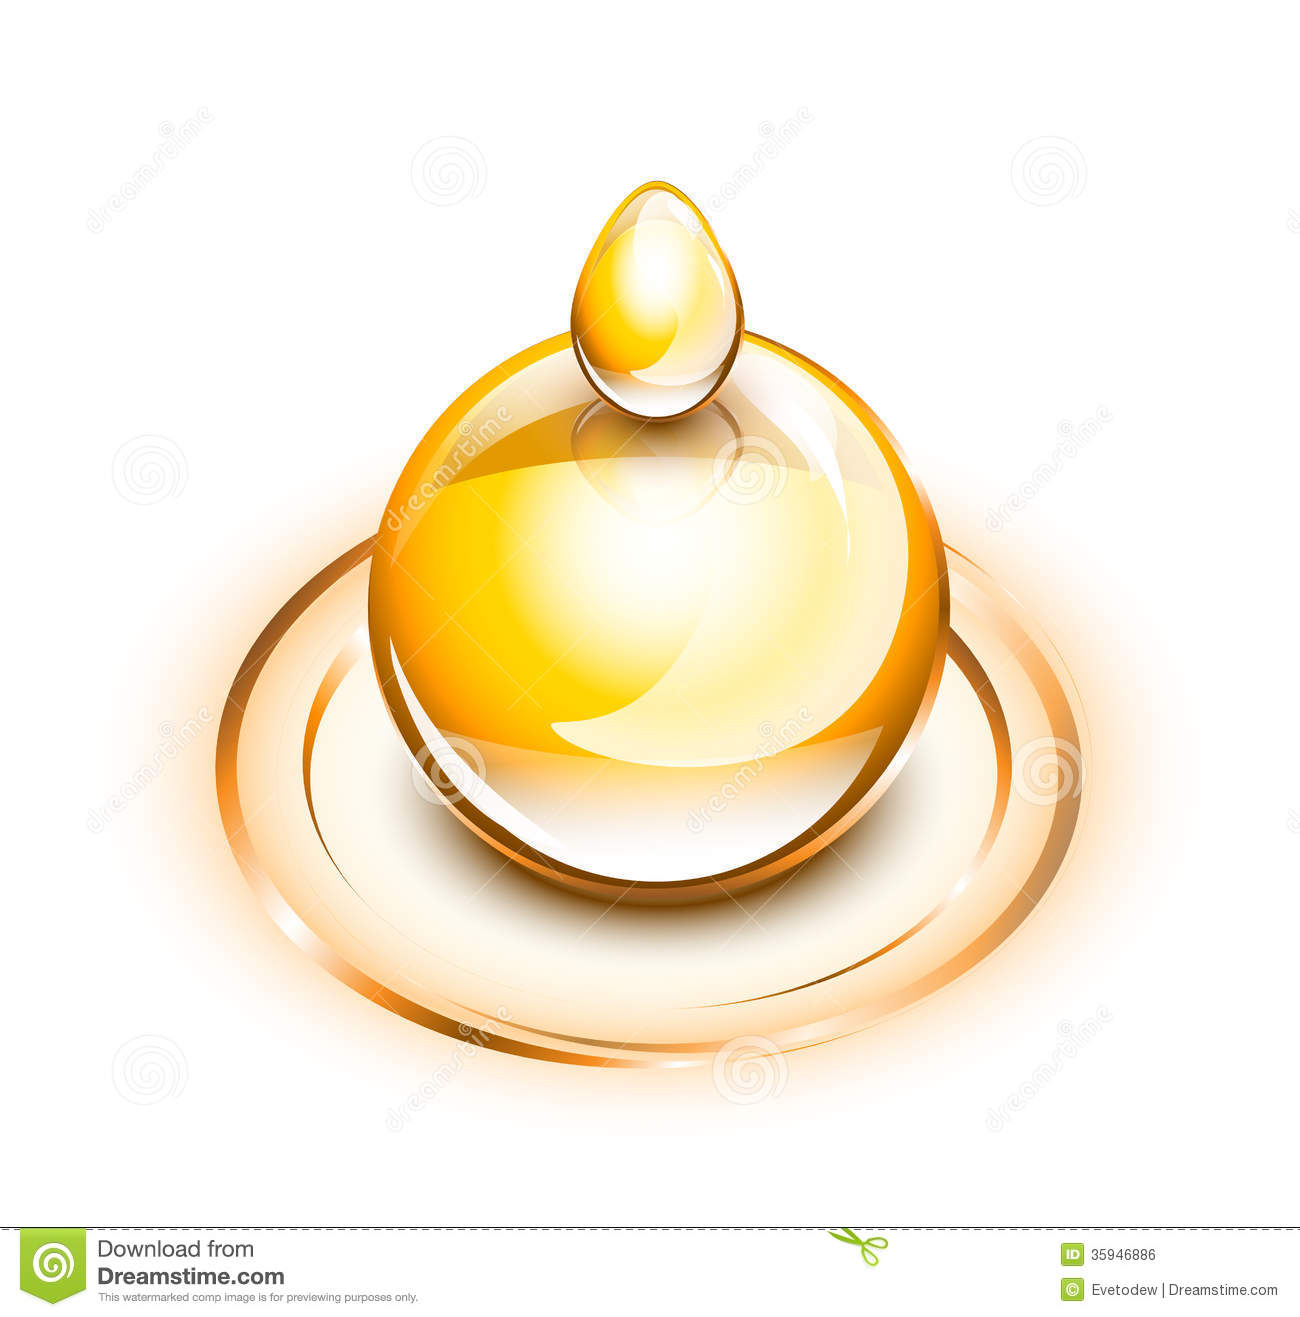 Oil Drops On Ripples Royalty Free Stock Image   Image  35946886